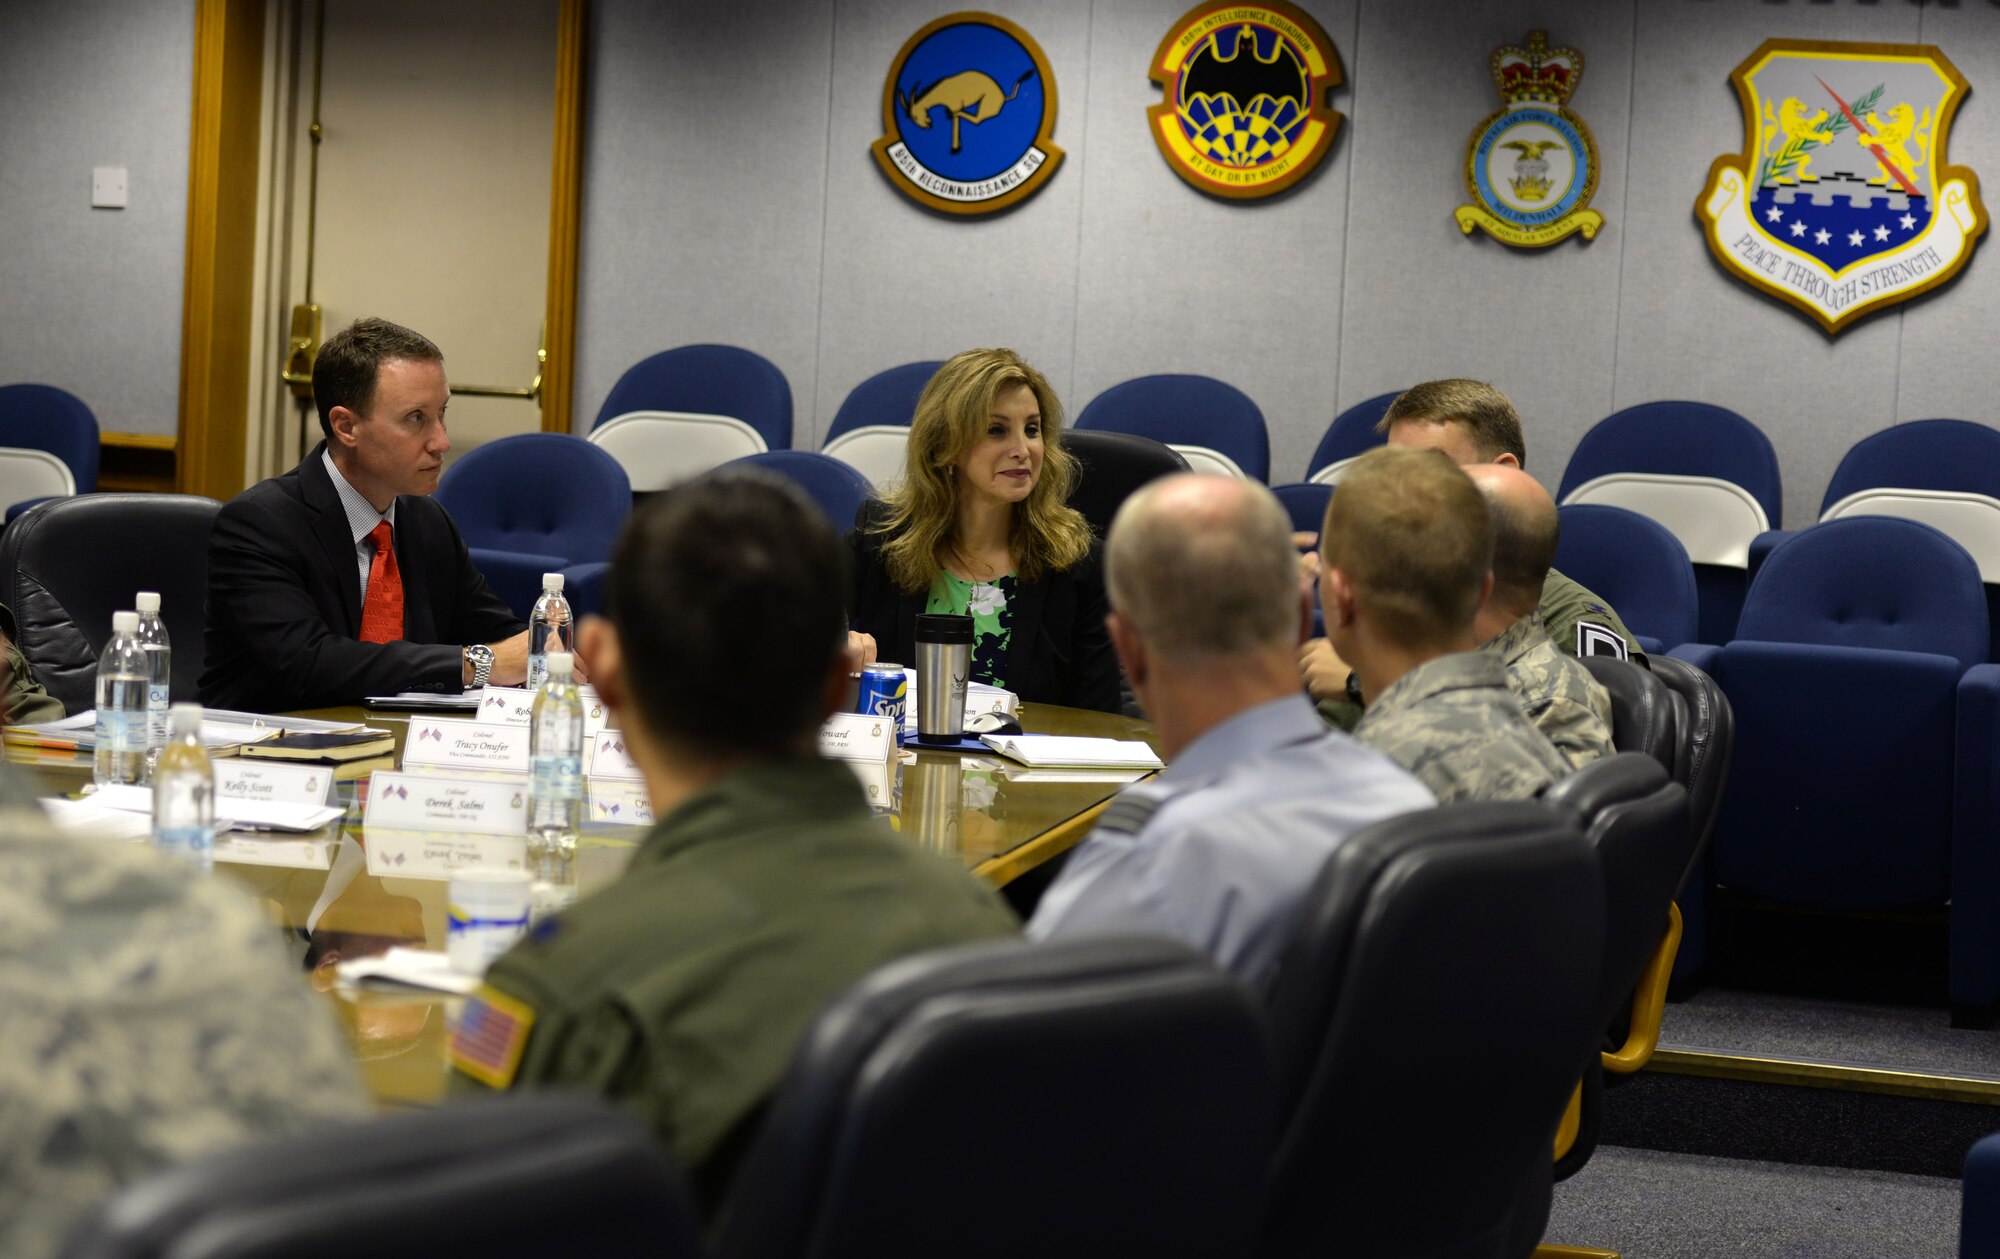 Amanda Simpson, center, Deputy Assistant Secretary of Defense for Operational Energy, discusses base units and their missions during a briefing July 29, 2016, on RAF Mildenhall, England. During the brief, Simpson learned the Team Mildenhall mission, vision and priorities from base leaders. (U.S. Air Force photo by Gina Randall)